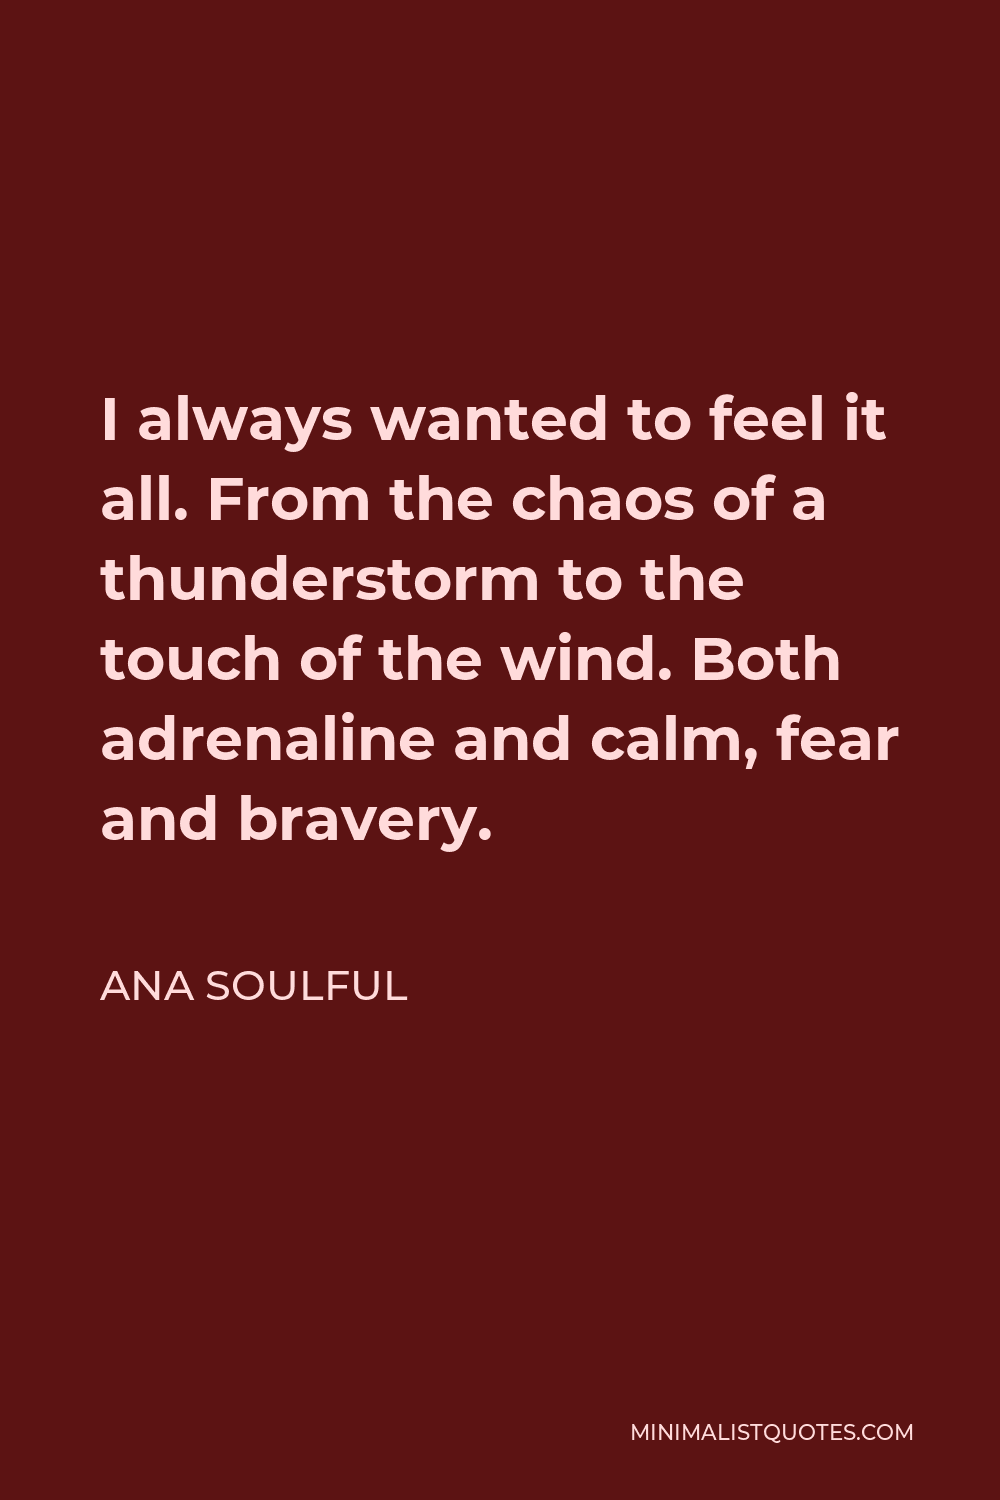 Ana Soulful Quote - I always wanted to feel it all. From the chaos of a thunderstorm to the touch of the wind. Both adrenaline and calm, fear and bravery.